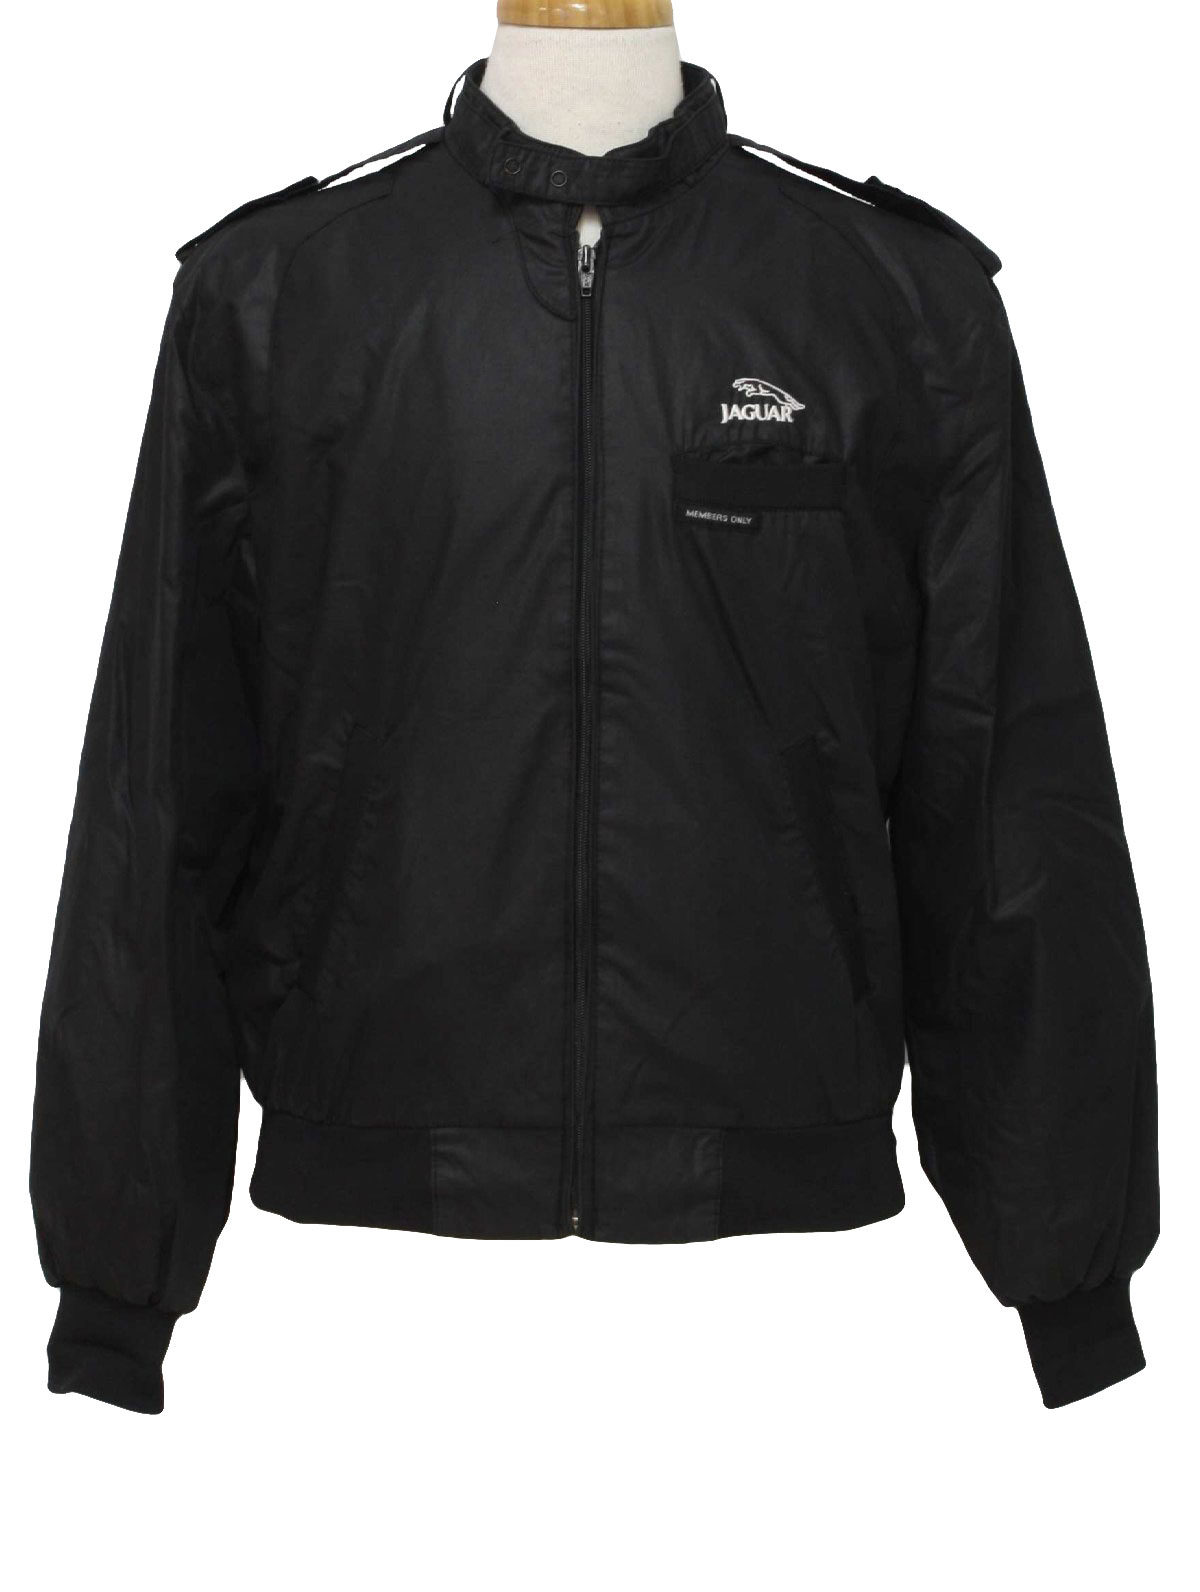 Retro 80s Jacket (Members Only) : 80s -Members Only- Mens black cotton ...